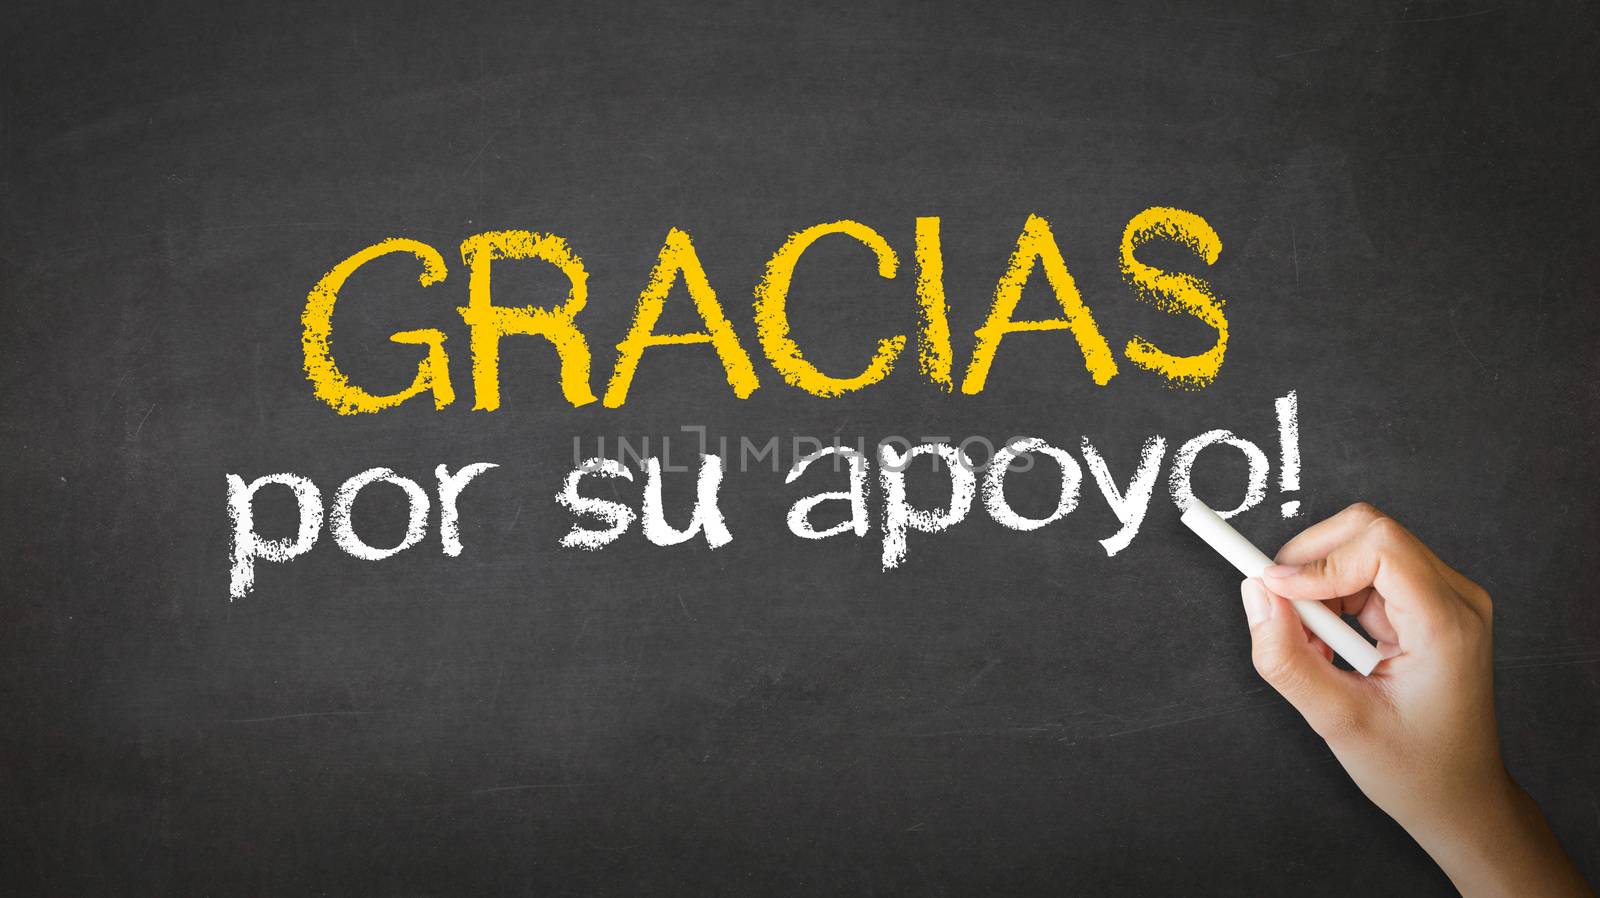 Thank you for your support (In Spanish) by kbuntu